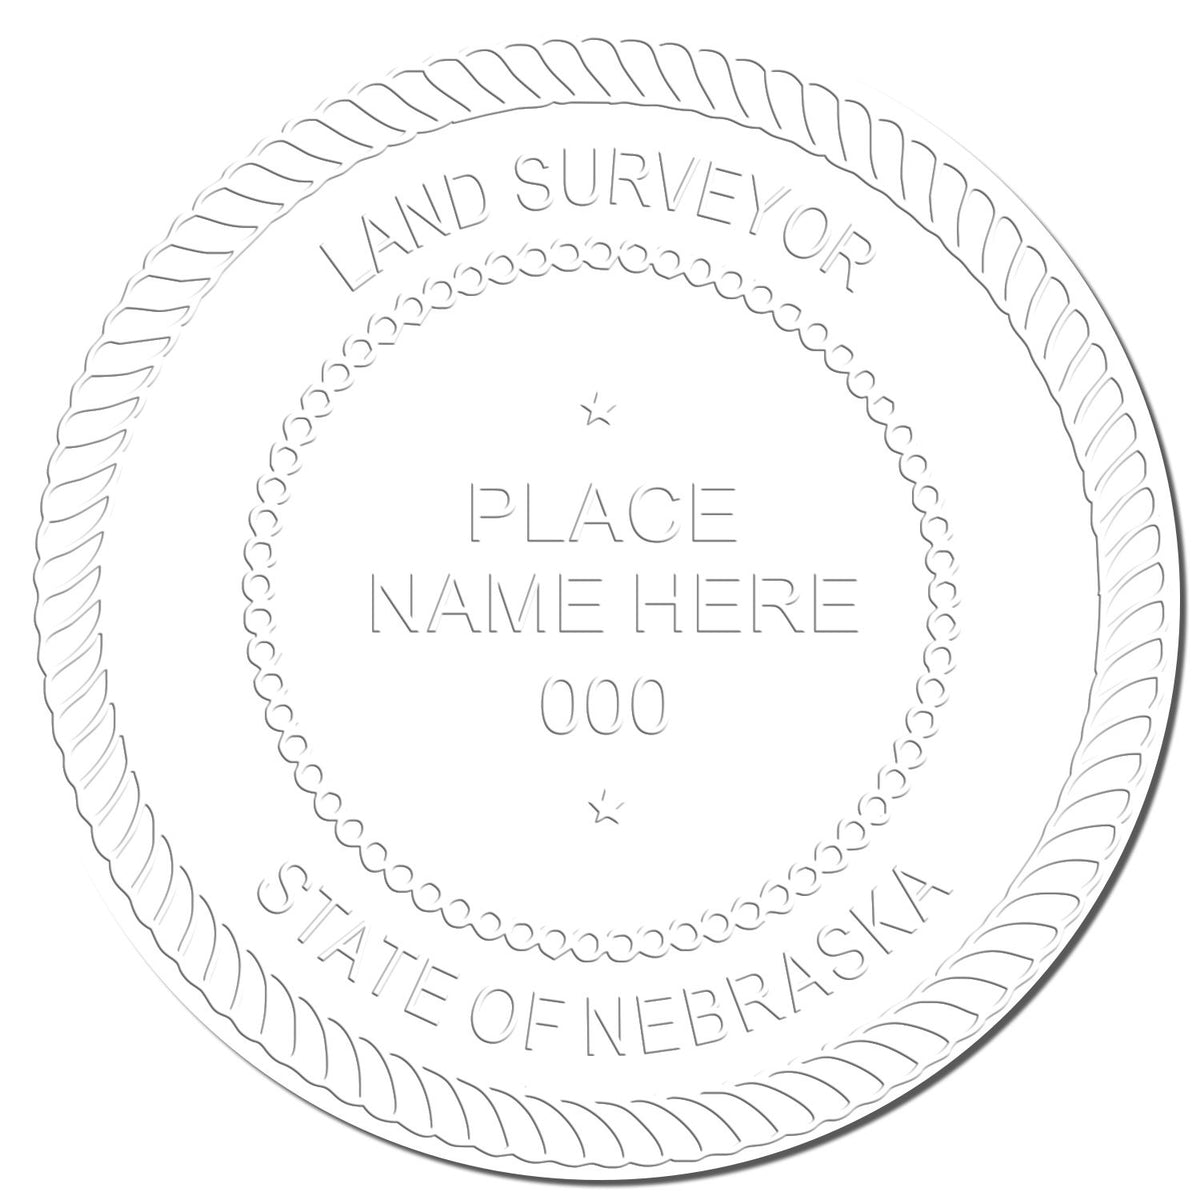 This paper is stamped with a sample imprint of the Extended Long Reach Nebraska Surveyor Embosser, signifying its quality and reliability.